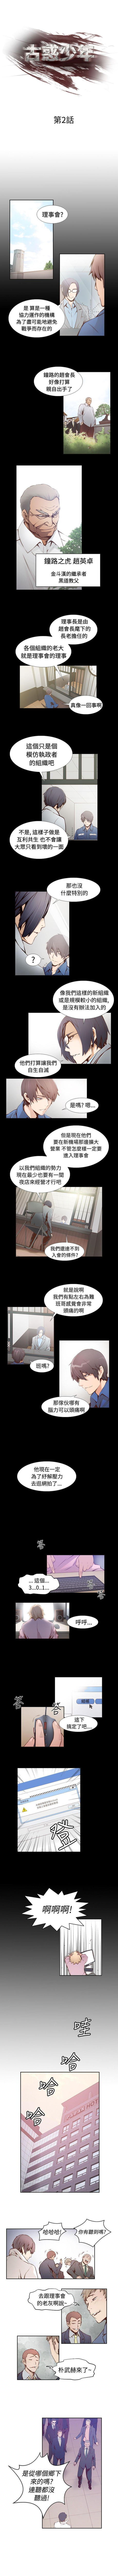 Chaturbate 古惑少年 1-54 Tall - Page 5